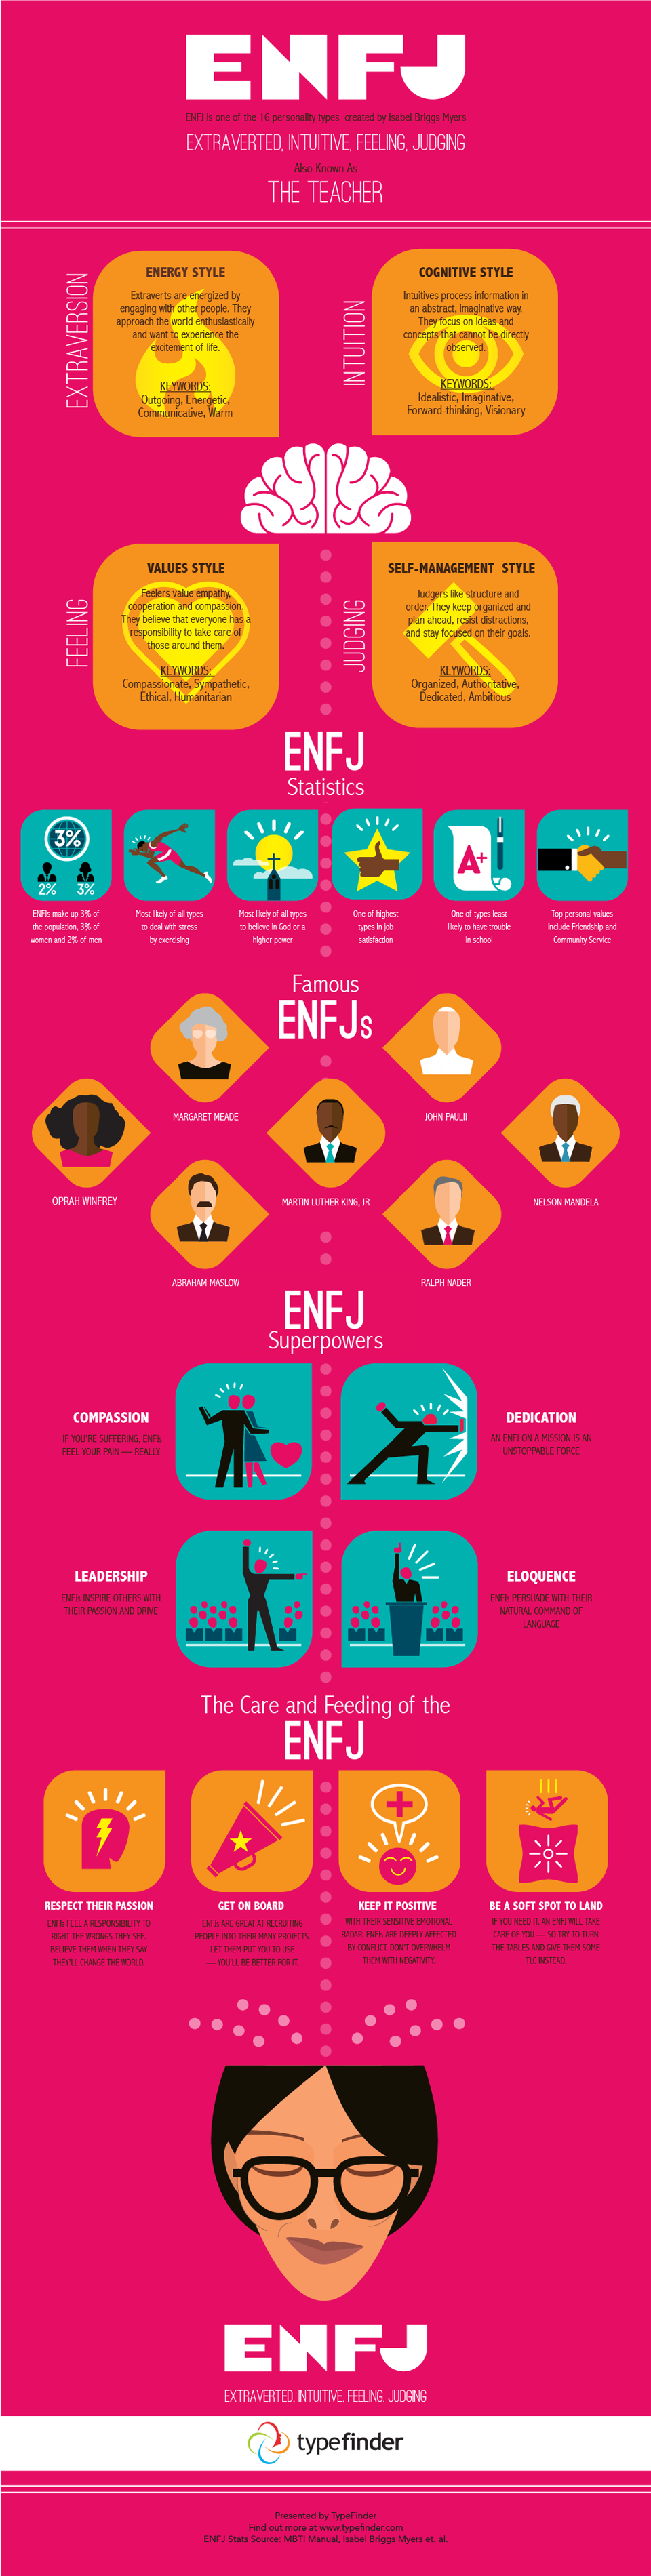 All About the ENFJ Personality Type | Truity